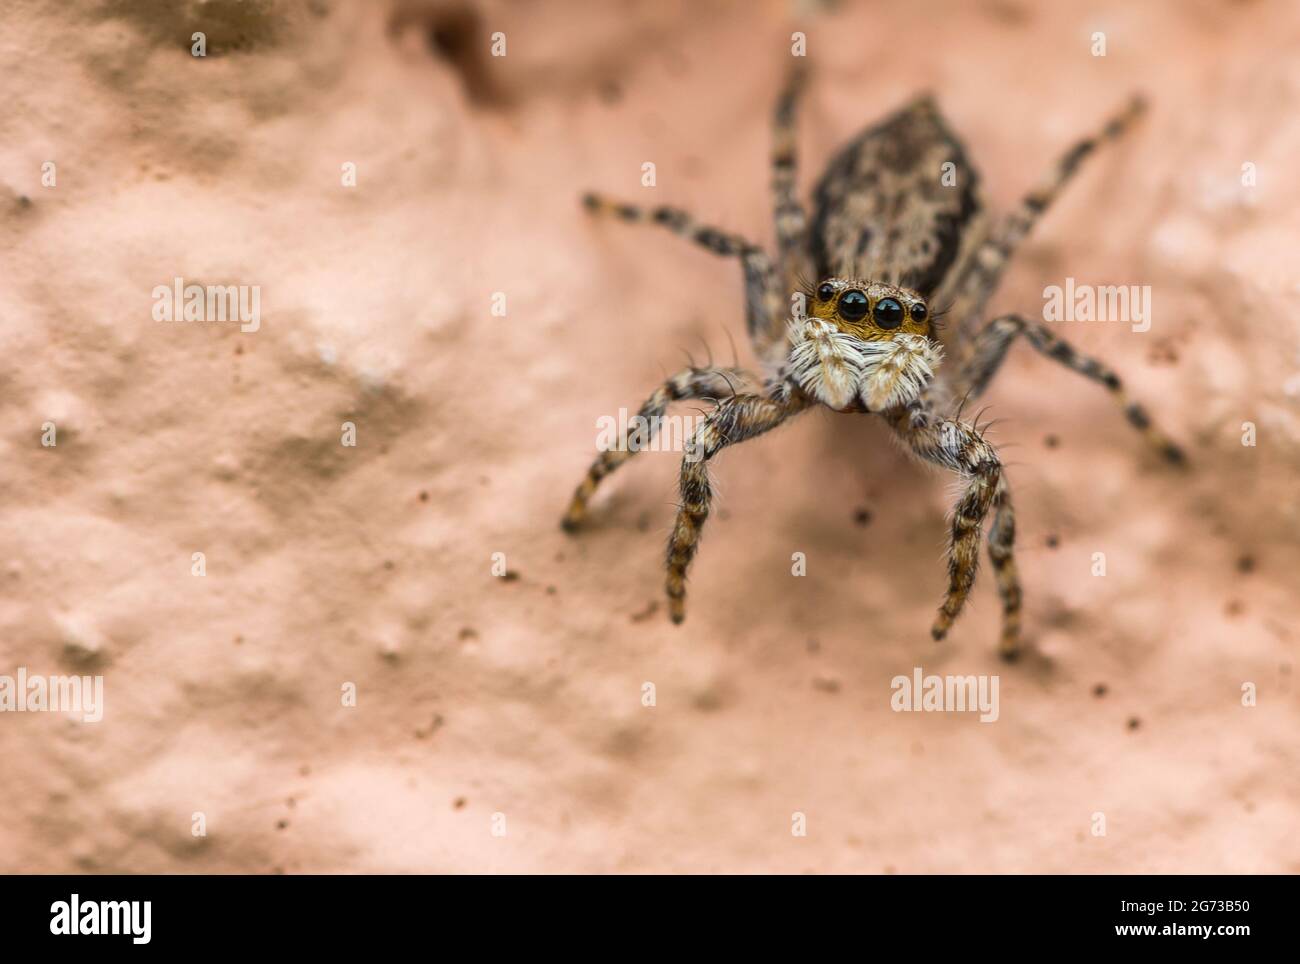 Closeup image of a jumping spider with big eyes and brown stripes on a light brown surface Stock Photo